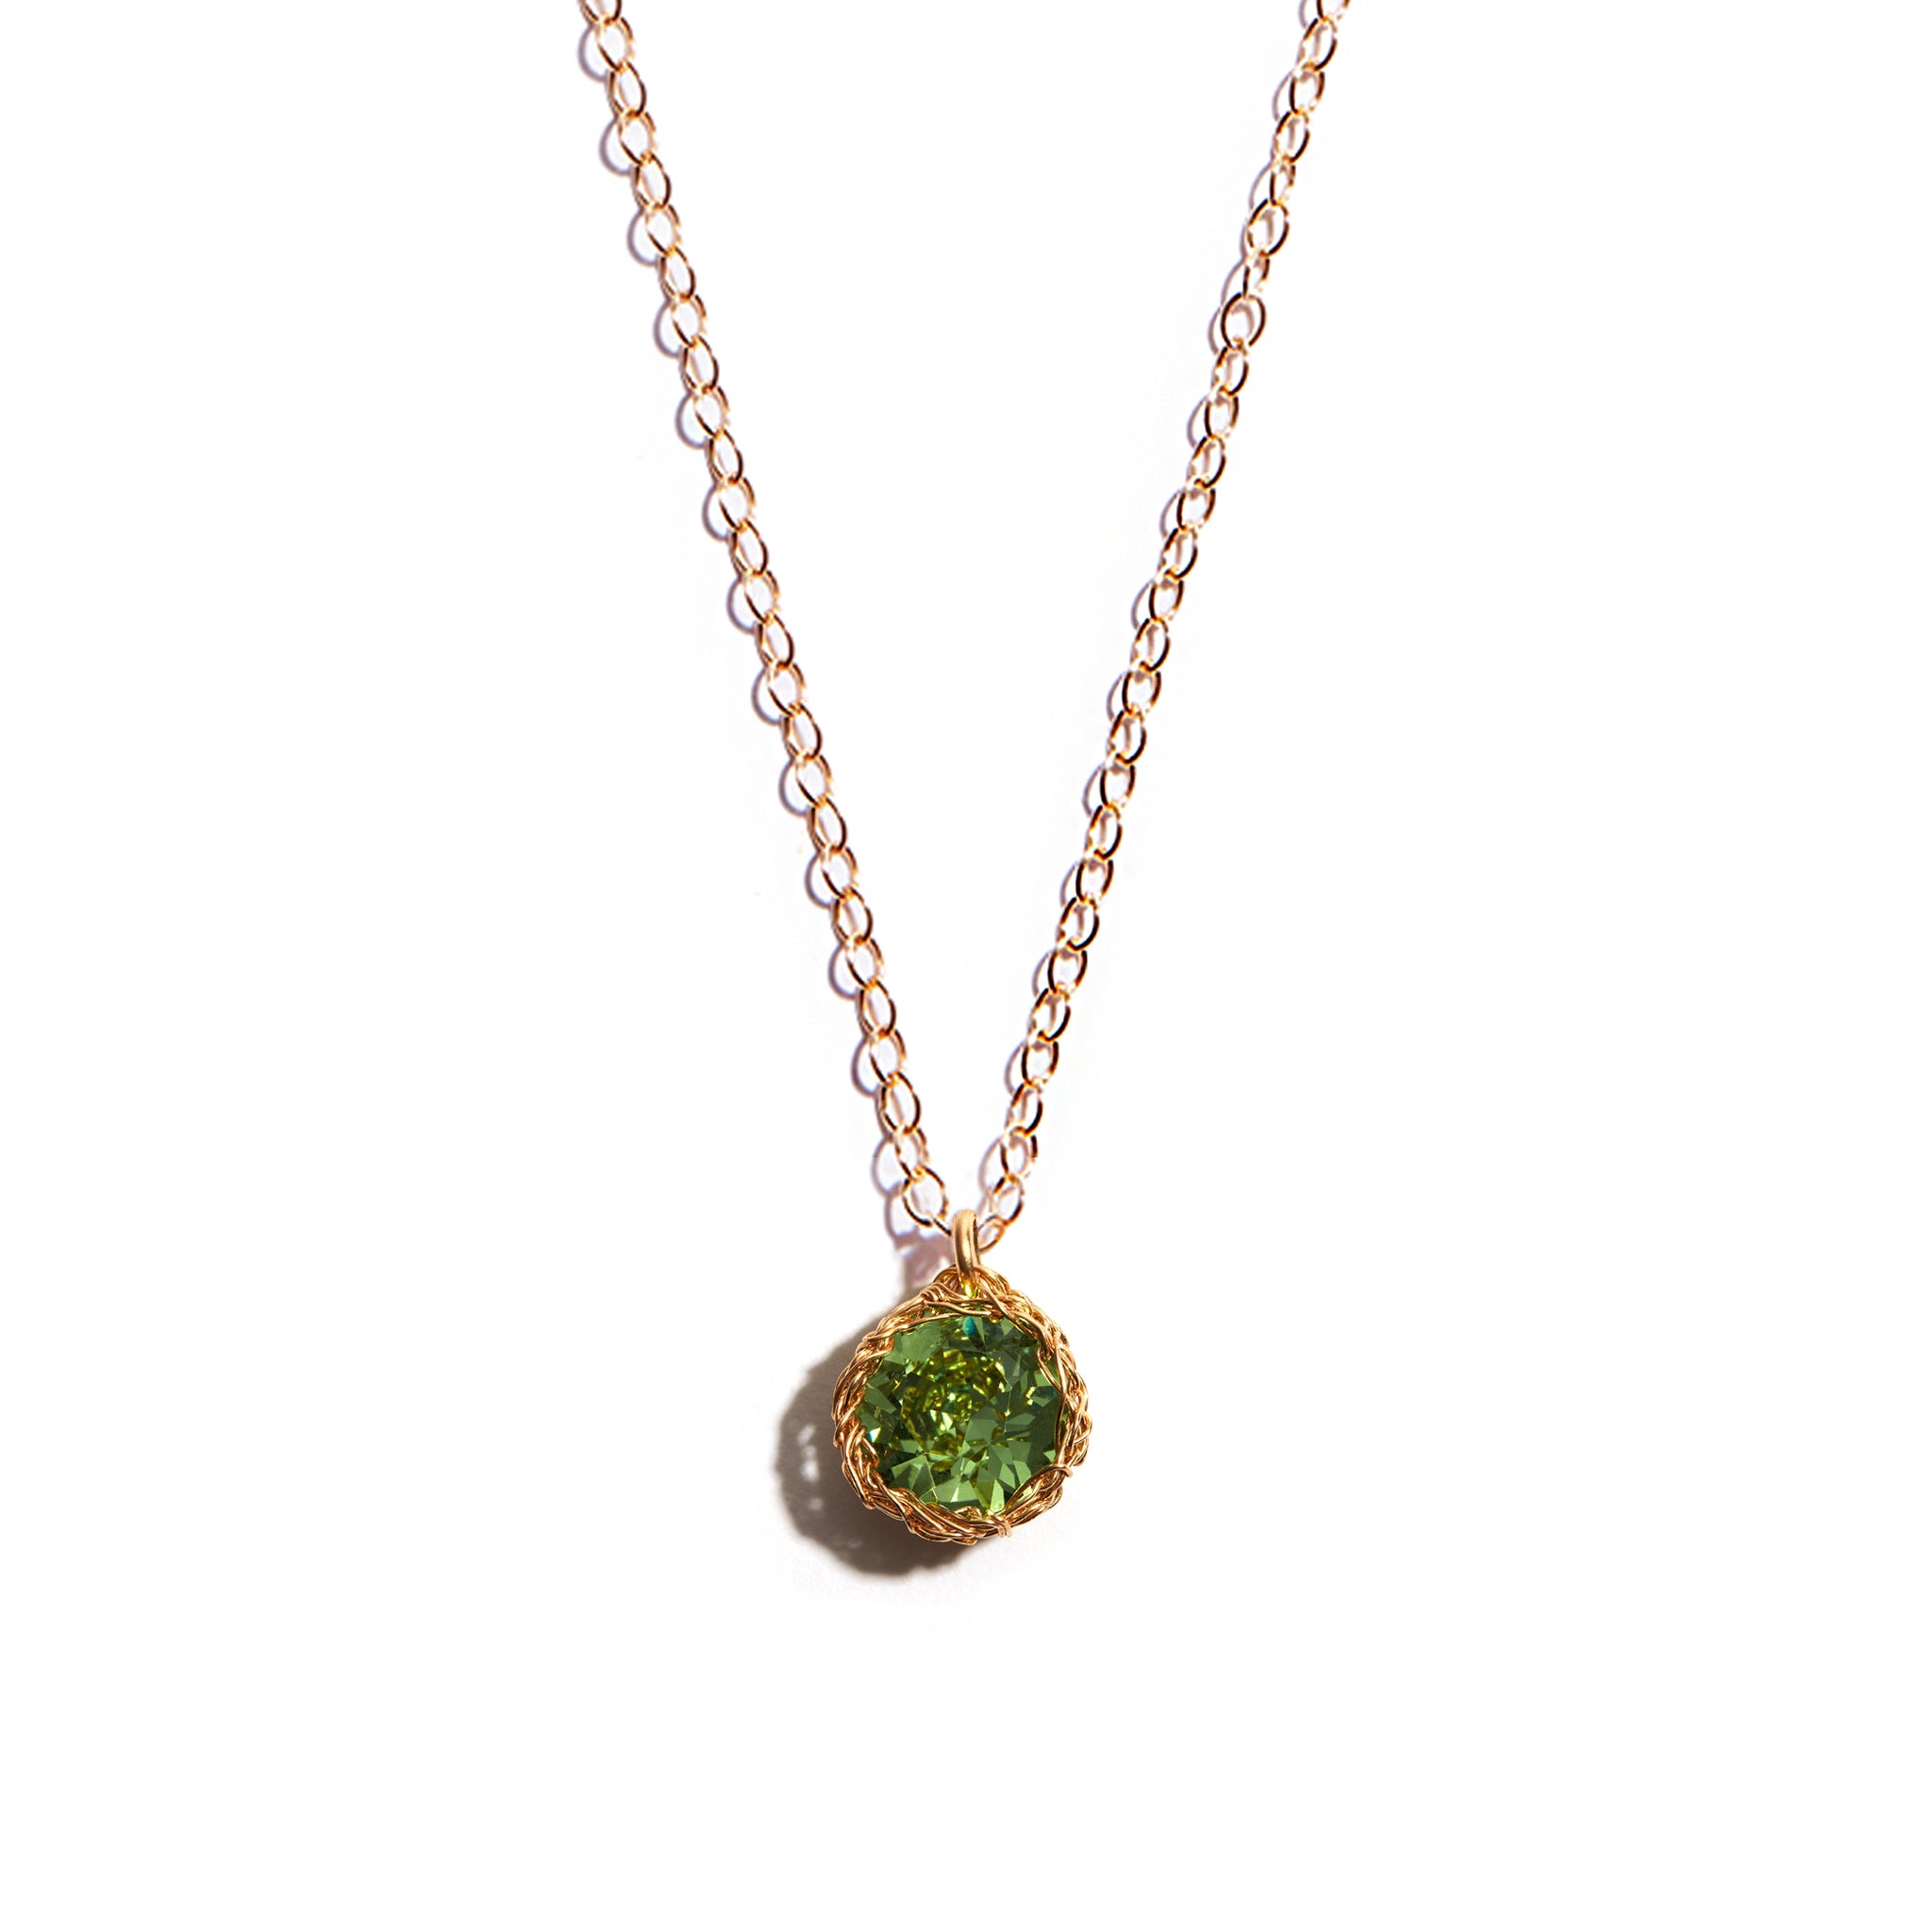 Close-up photo of a crochet necklace featuring a August birthstone pendant made of peridot, set in 14 ct gold-filled metal.